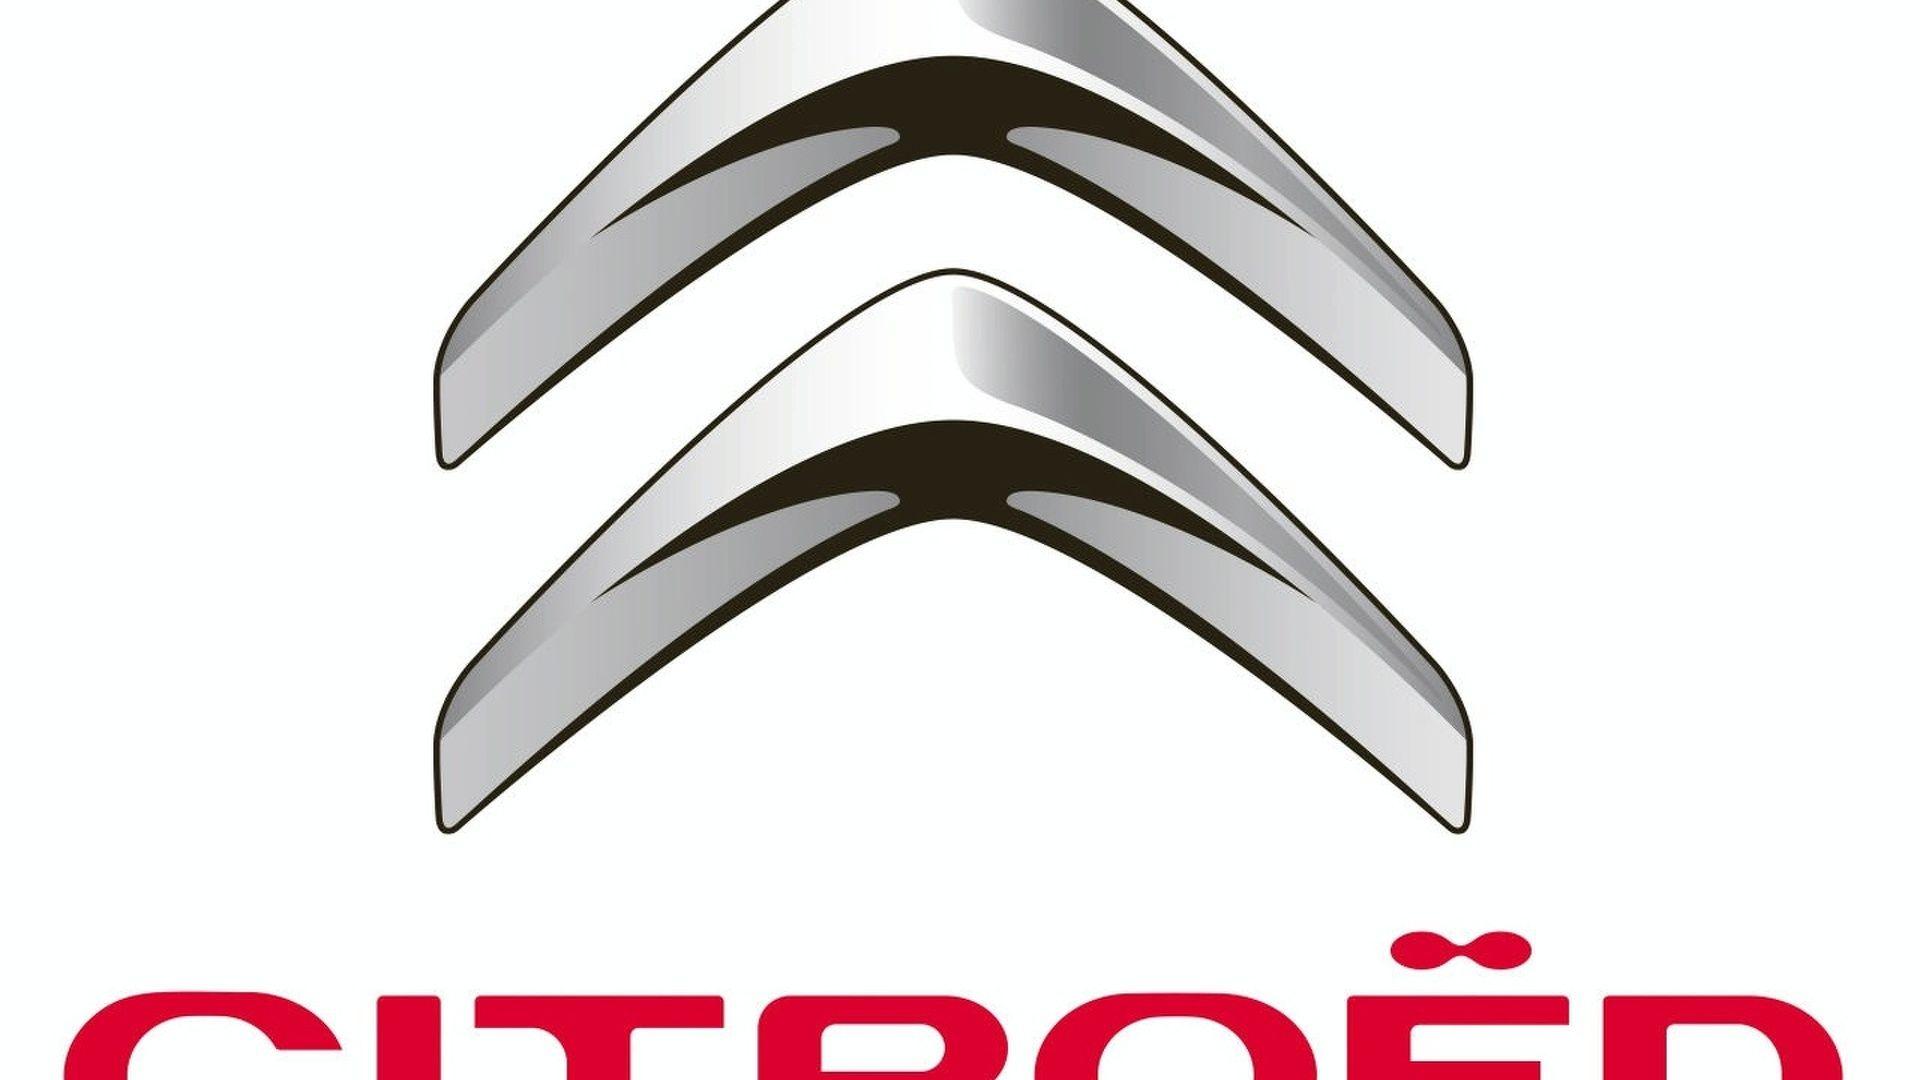 Company with Two Boomerangs Logo - OFFICIAL: Citroen Presents New Logo & Brand Identity Strategy to Dealers